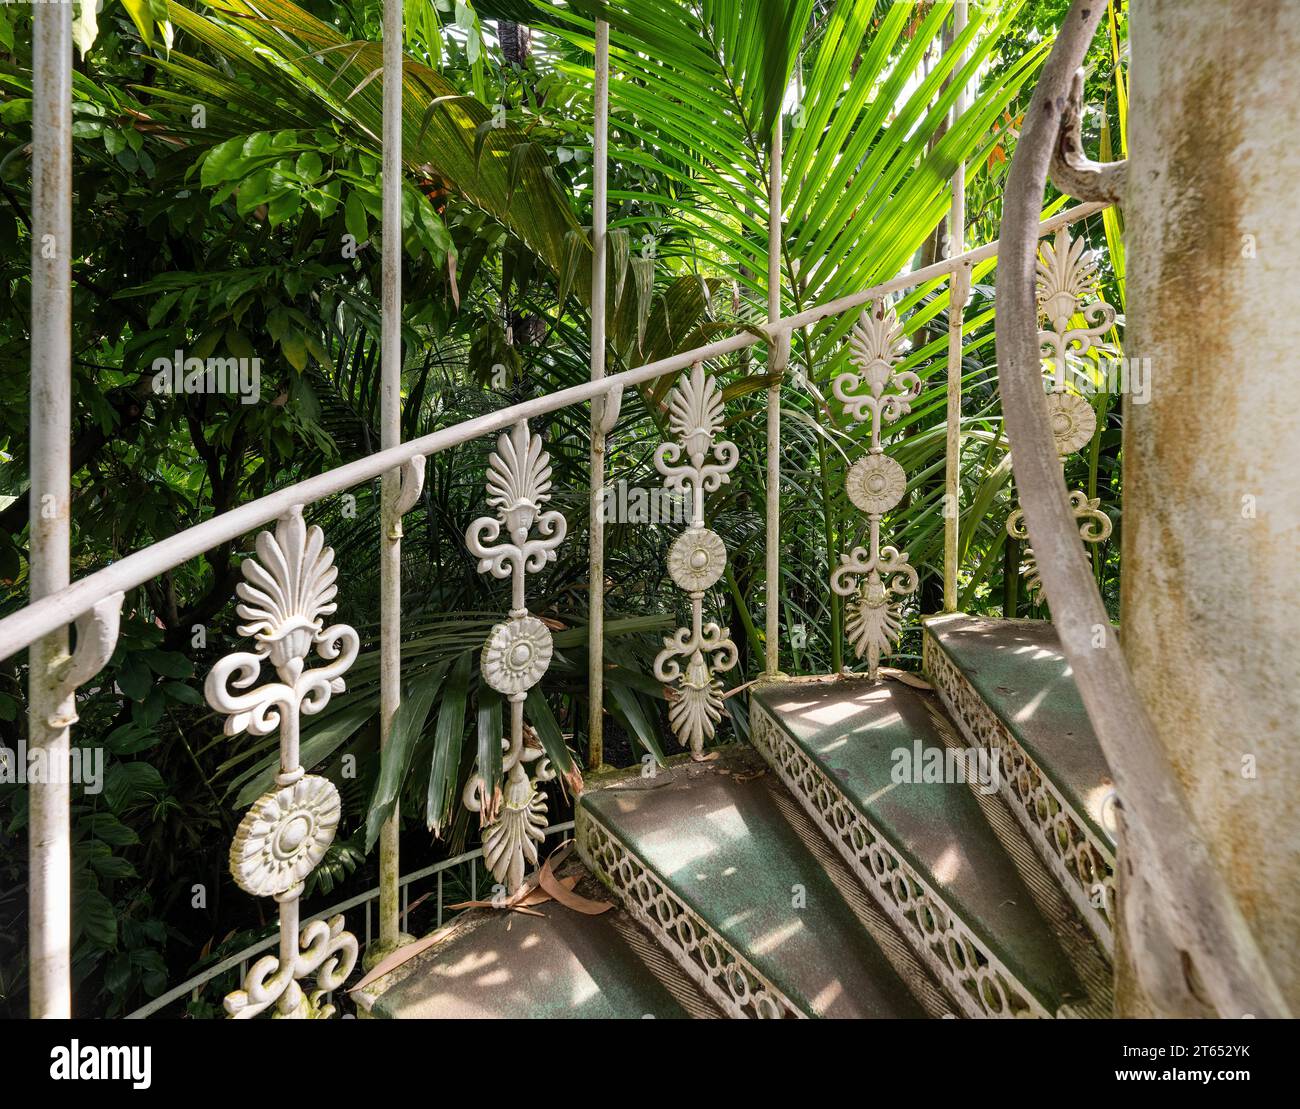 Cast-iron spiral staircase, Palm House, oldest Victorian greenhouse in the world, Royal Botanic Gardens, Kew, London, England, Great Britain Stock Photo